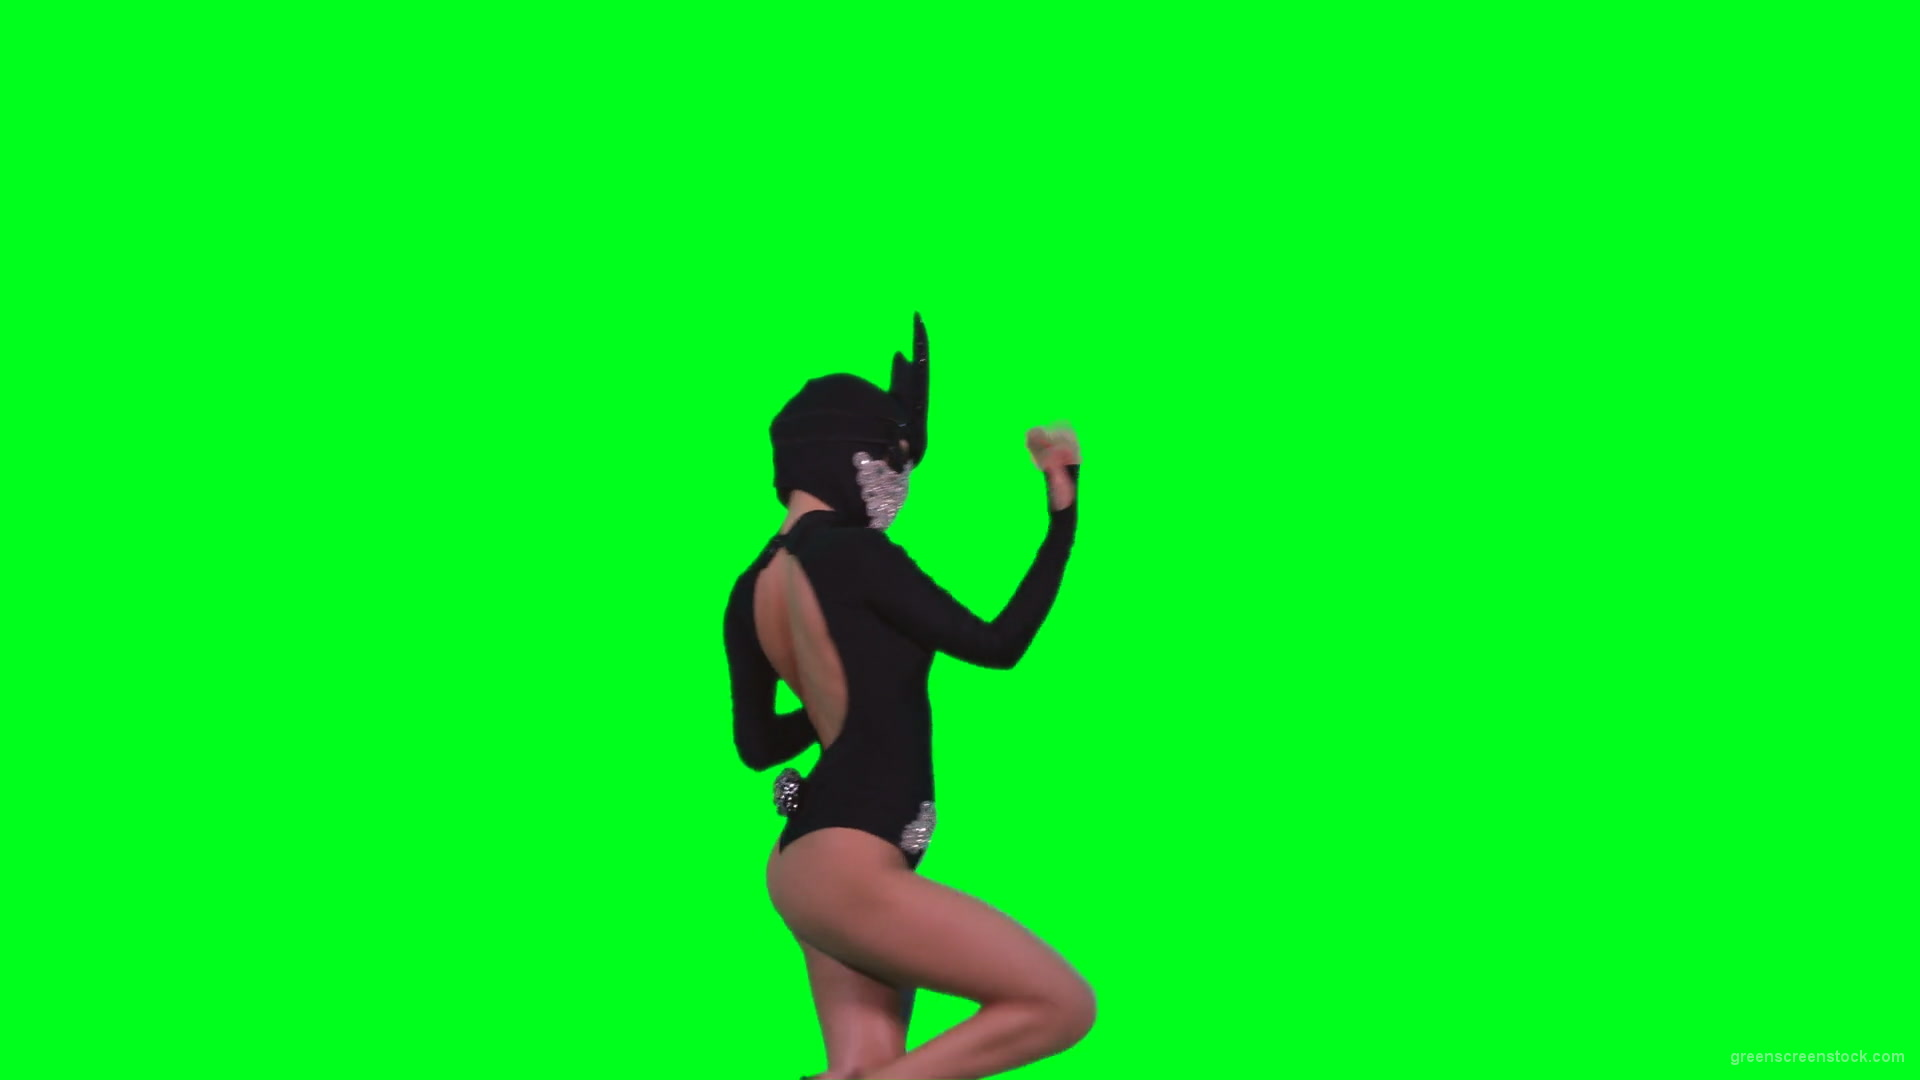 vj video background Sexy-bunny-girl-dance-performs-in-rabbit-costume-on-green-screen-4K-Video-Footage-1920_003